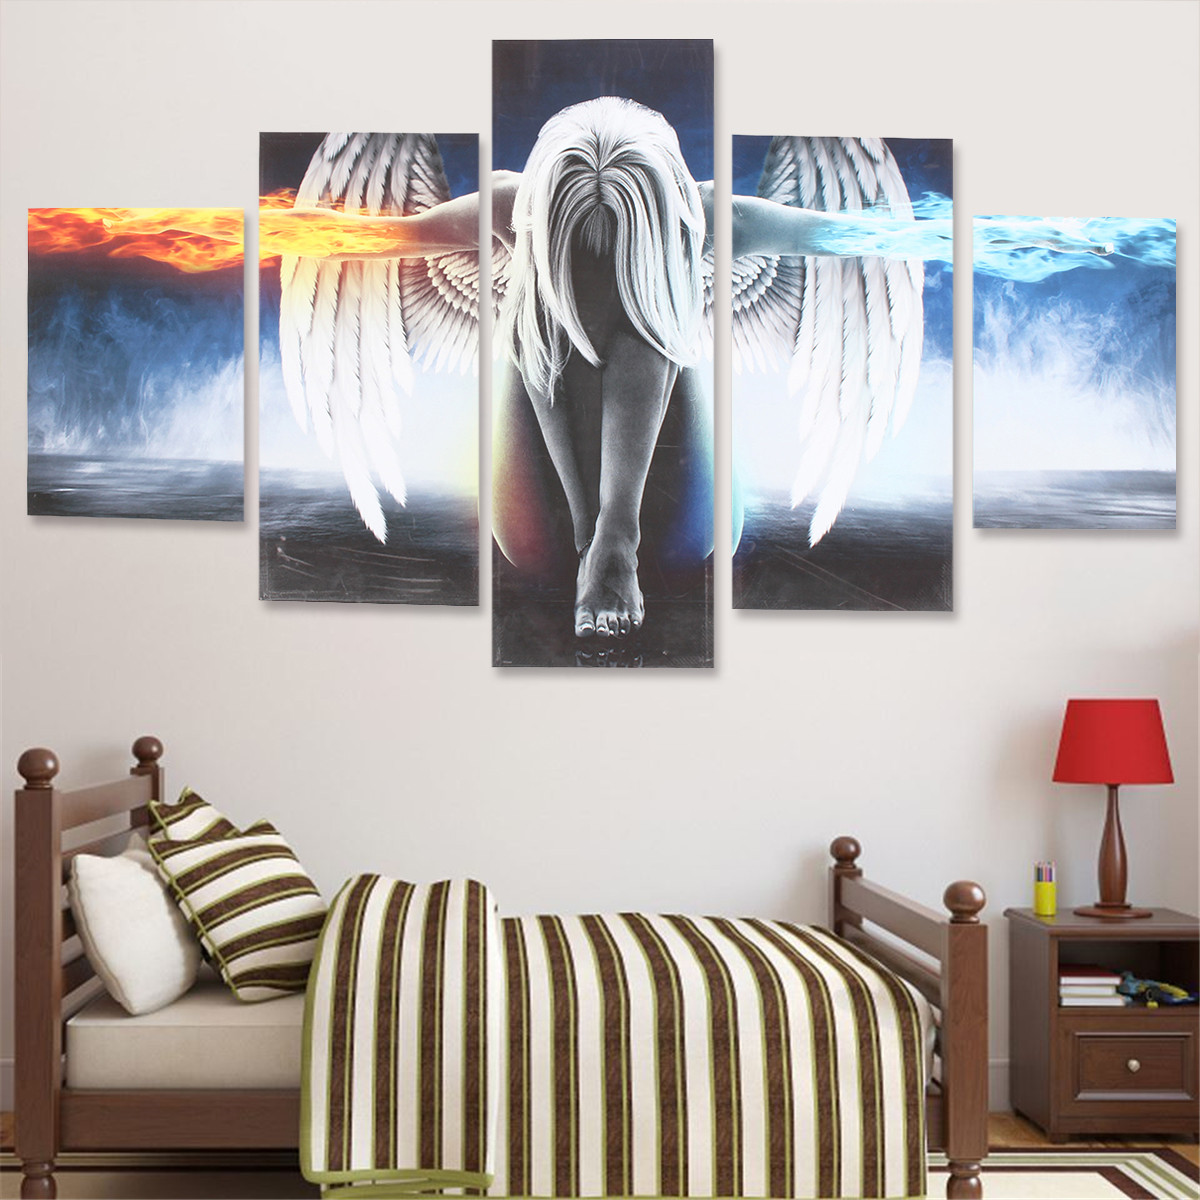 5PCS-Angel-Canvas-Print-Painting-Modern-Art-Wall-Picture-Home-Decor-Decoration-with-Framed-for-Home--1219145-9